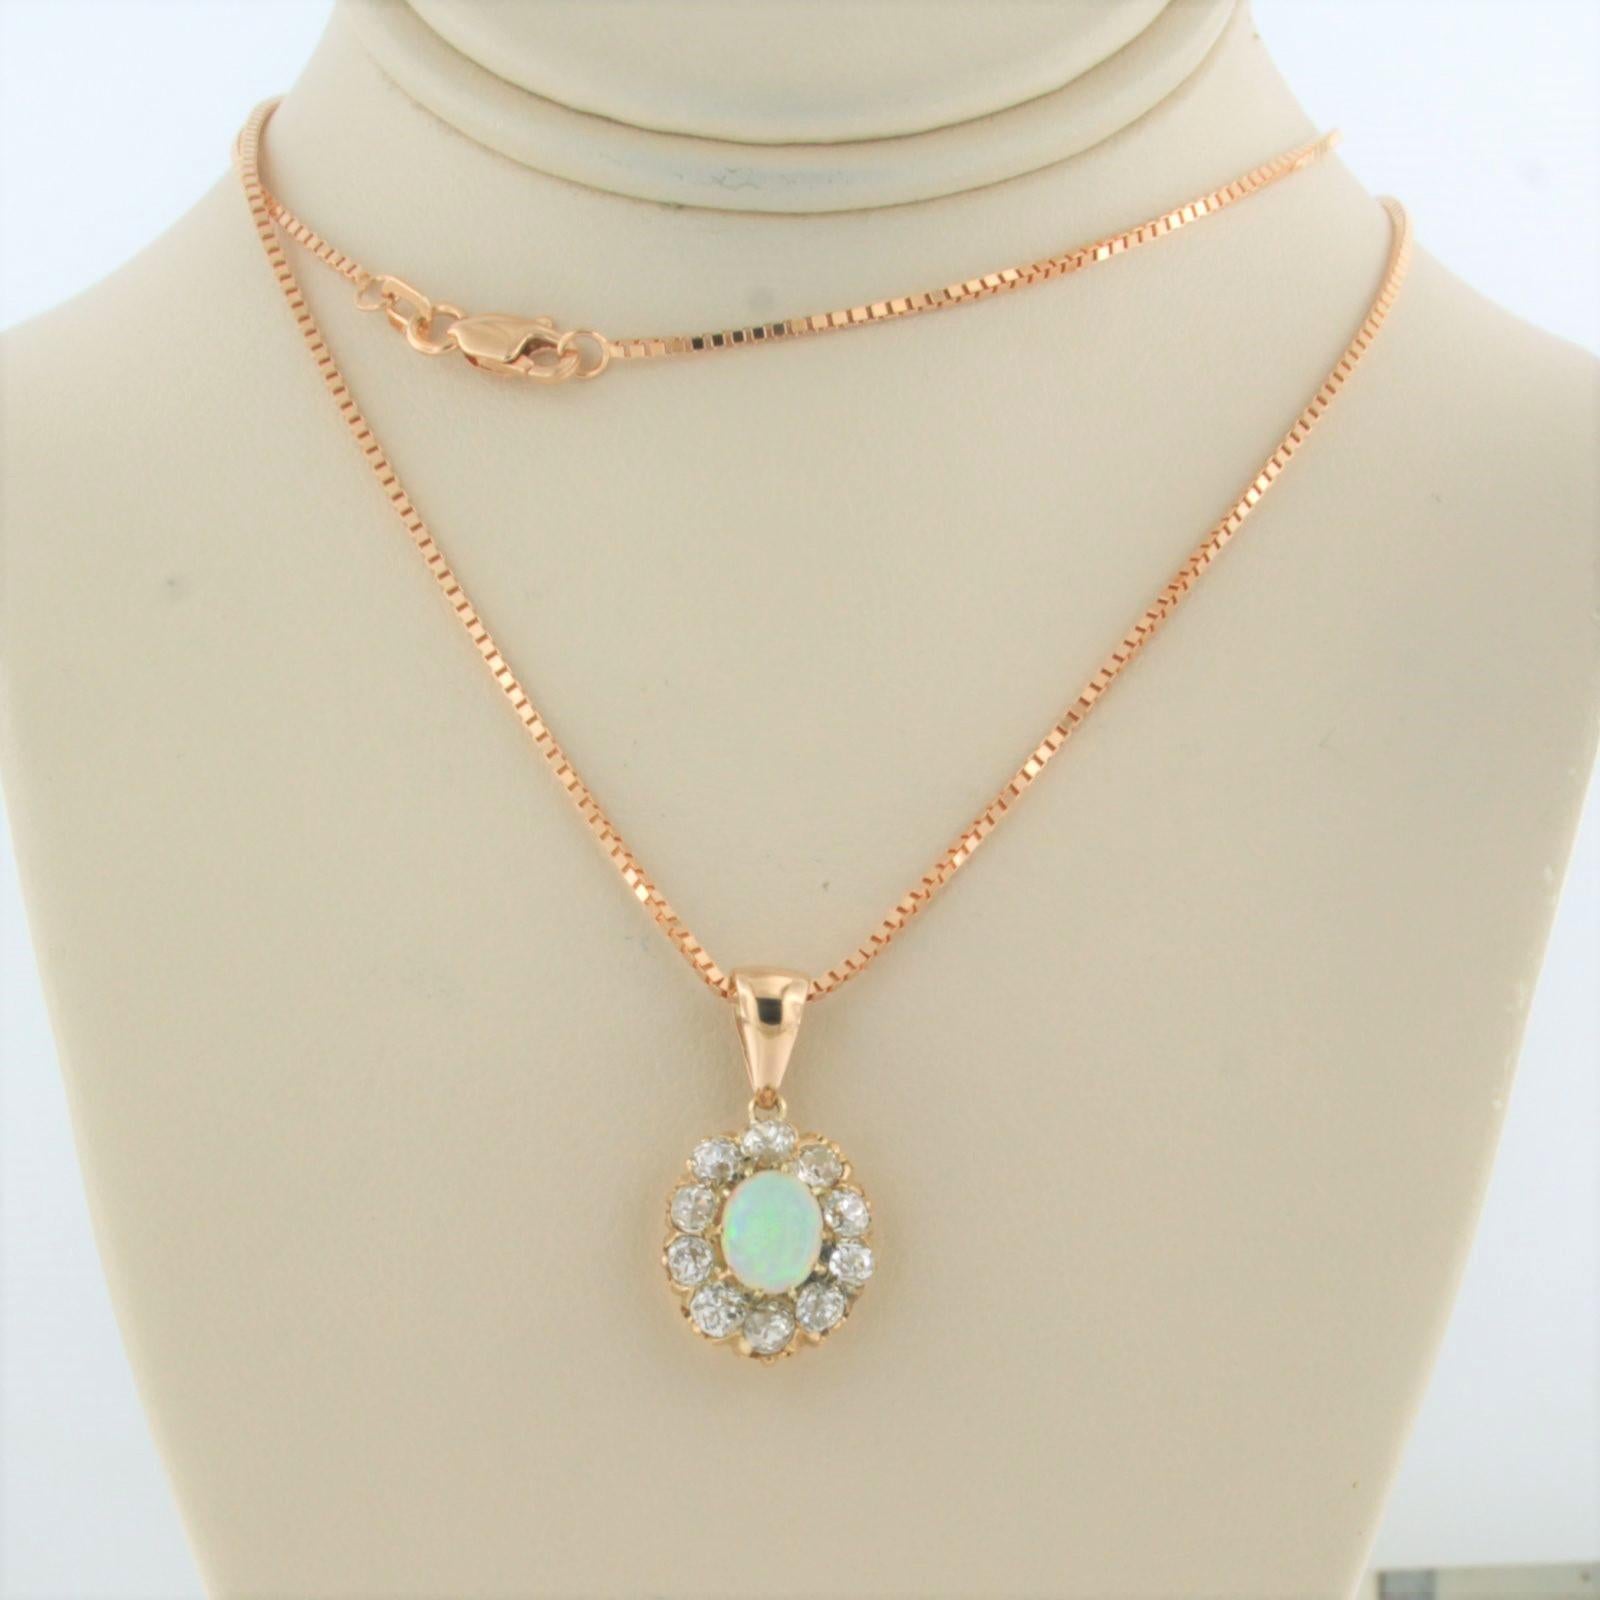 14k pink gold necklace with a cluster pendant set with an opal in the center and arround it old mine cut diamonds. 1.00ct - G/H - SI - 50 cm long

detailed description:

The necklace is 50 cm long and 1.0 mm wide, the necklace is new

the pendant is